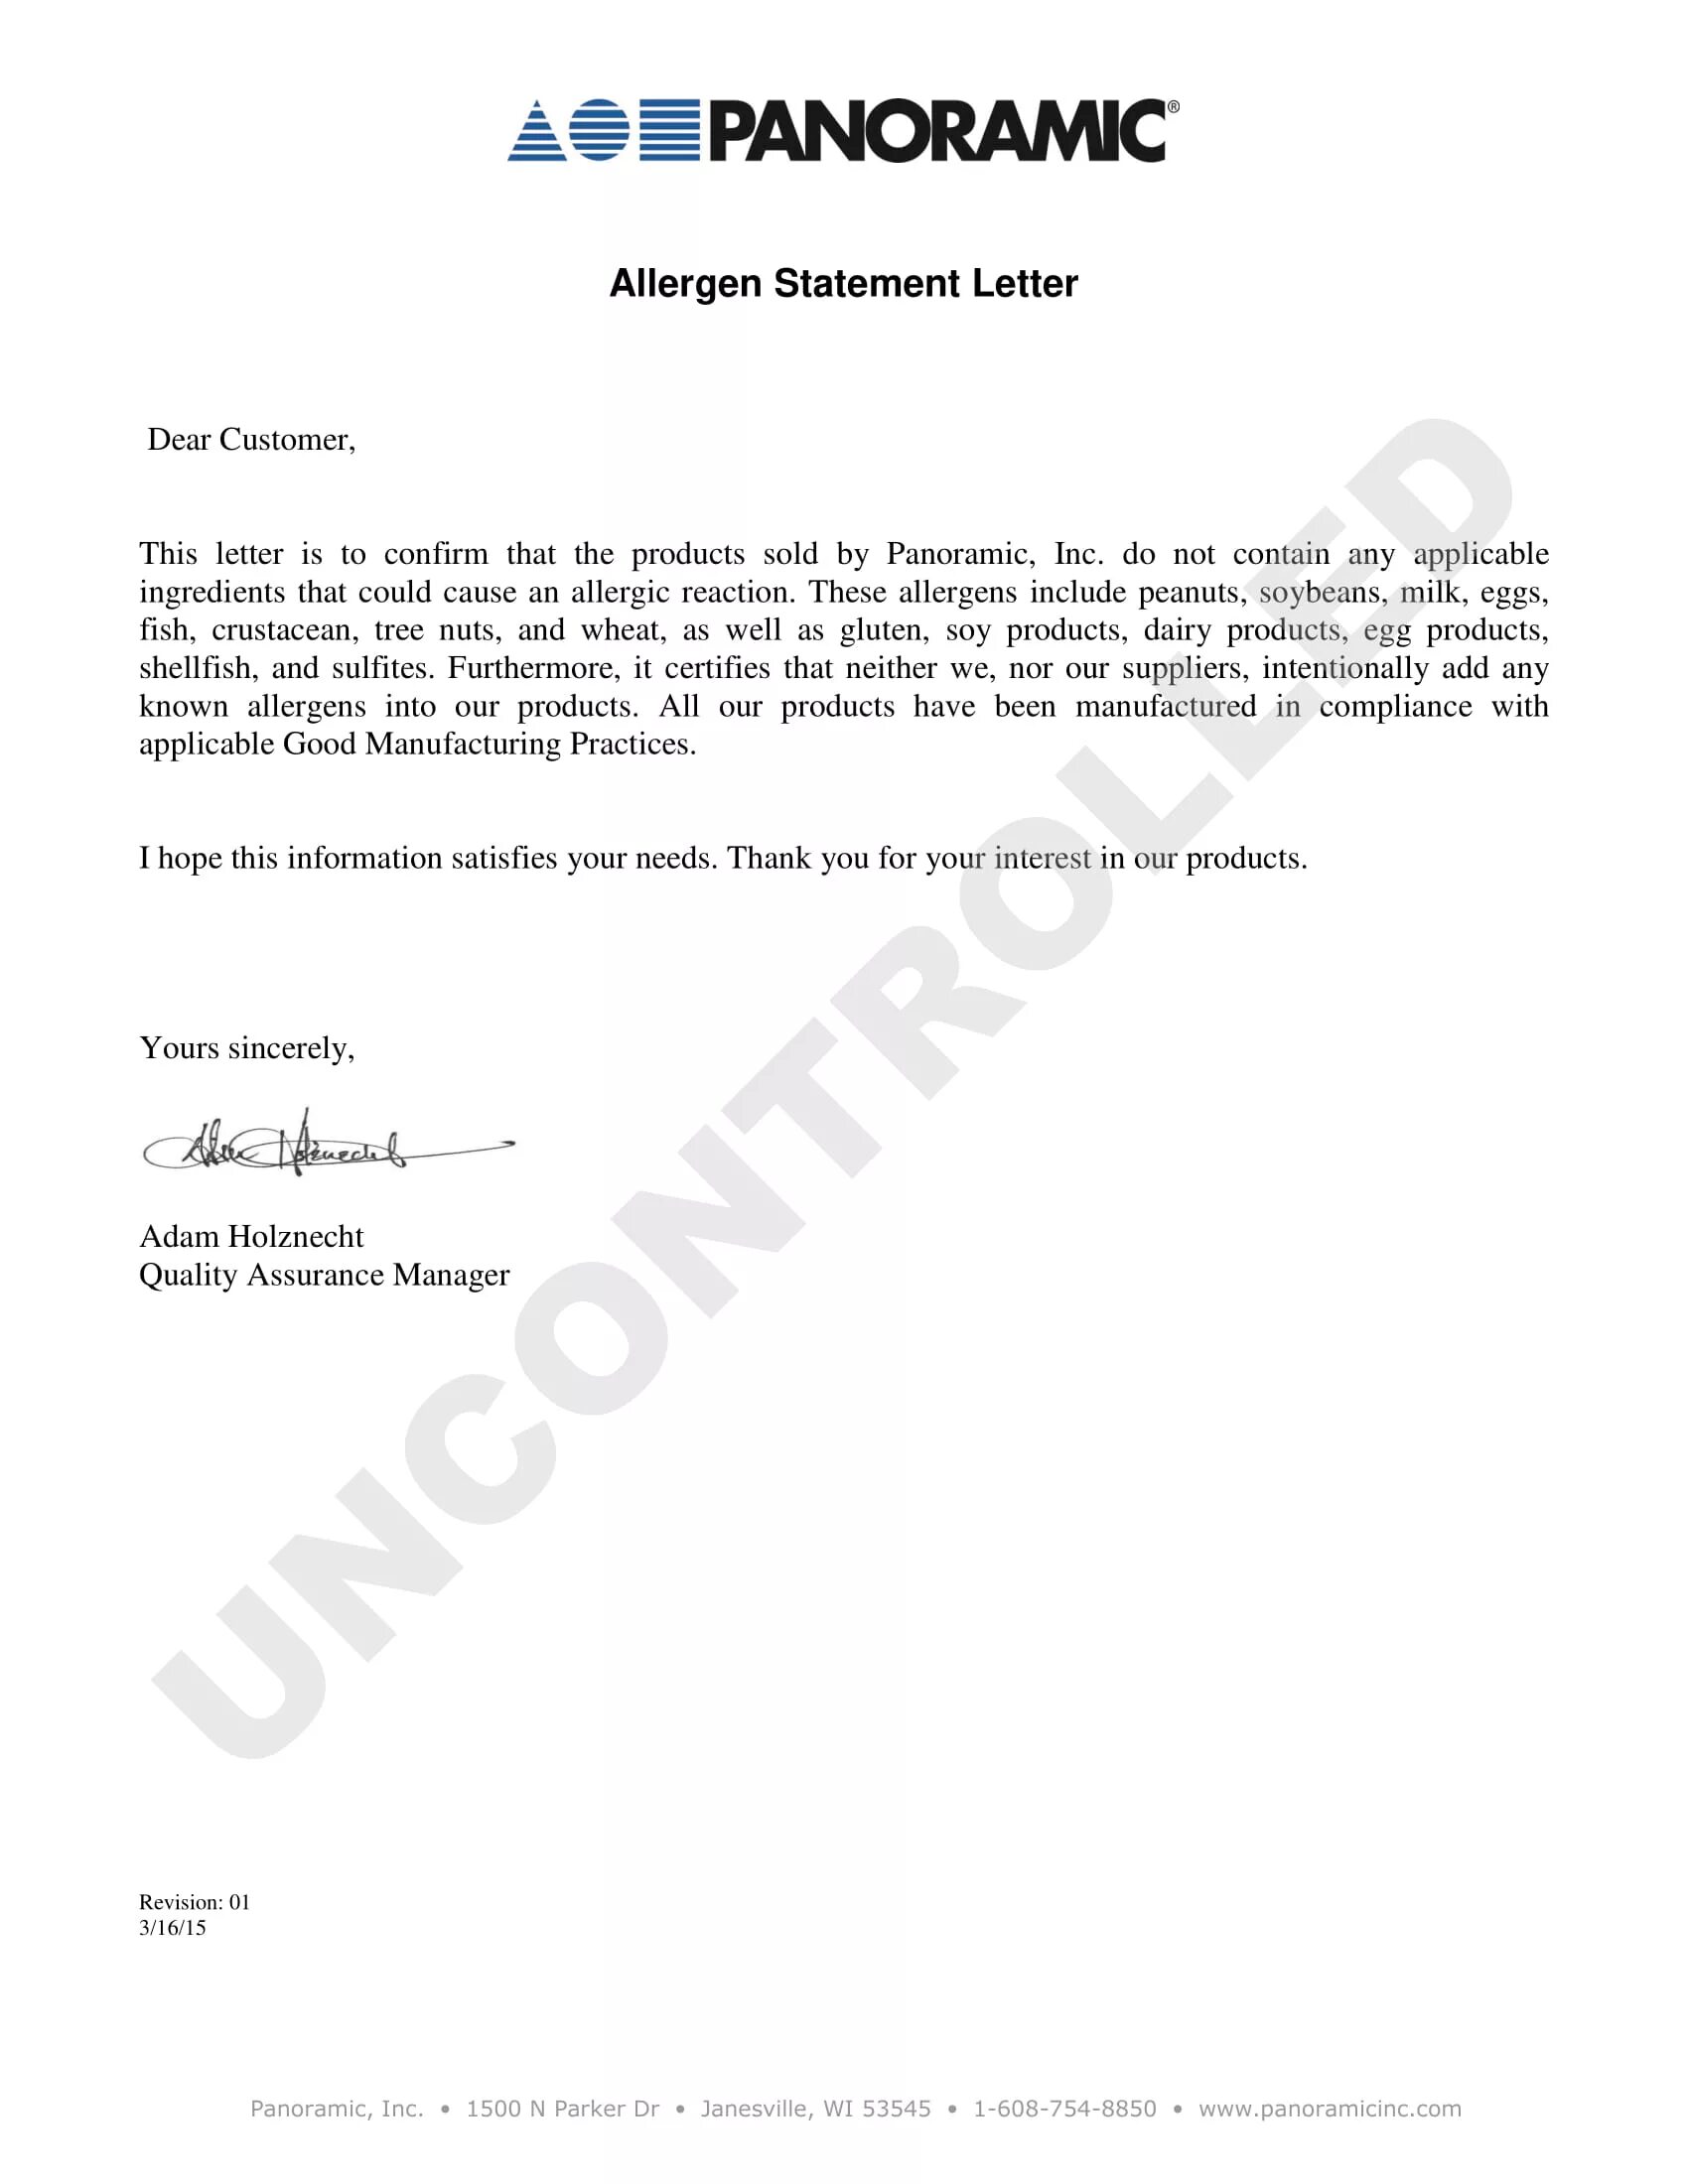 Statement letter. Письмо-Statement. Statement Letter between Countrys. Honor Letter.